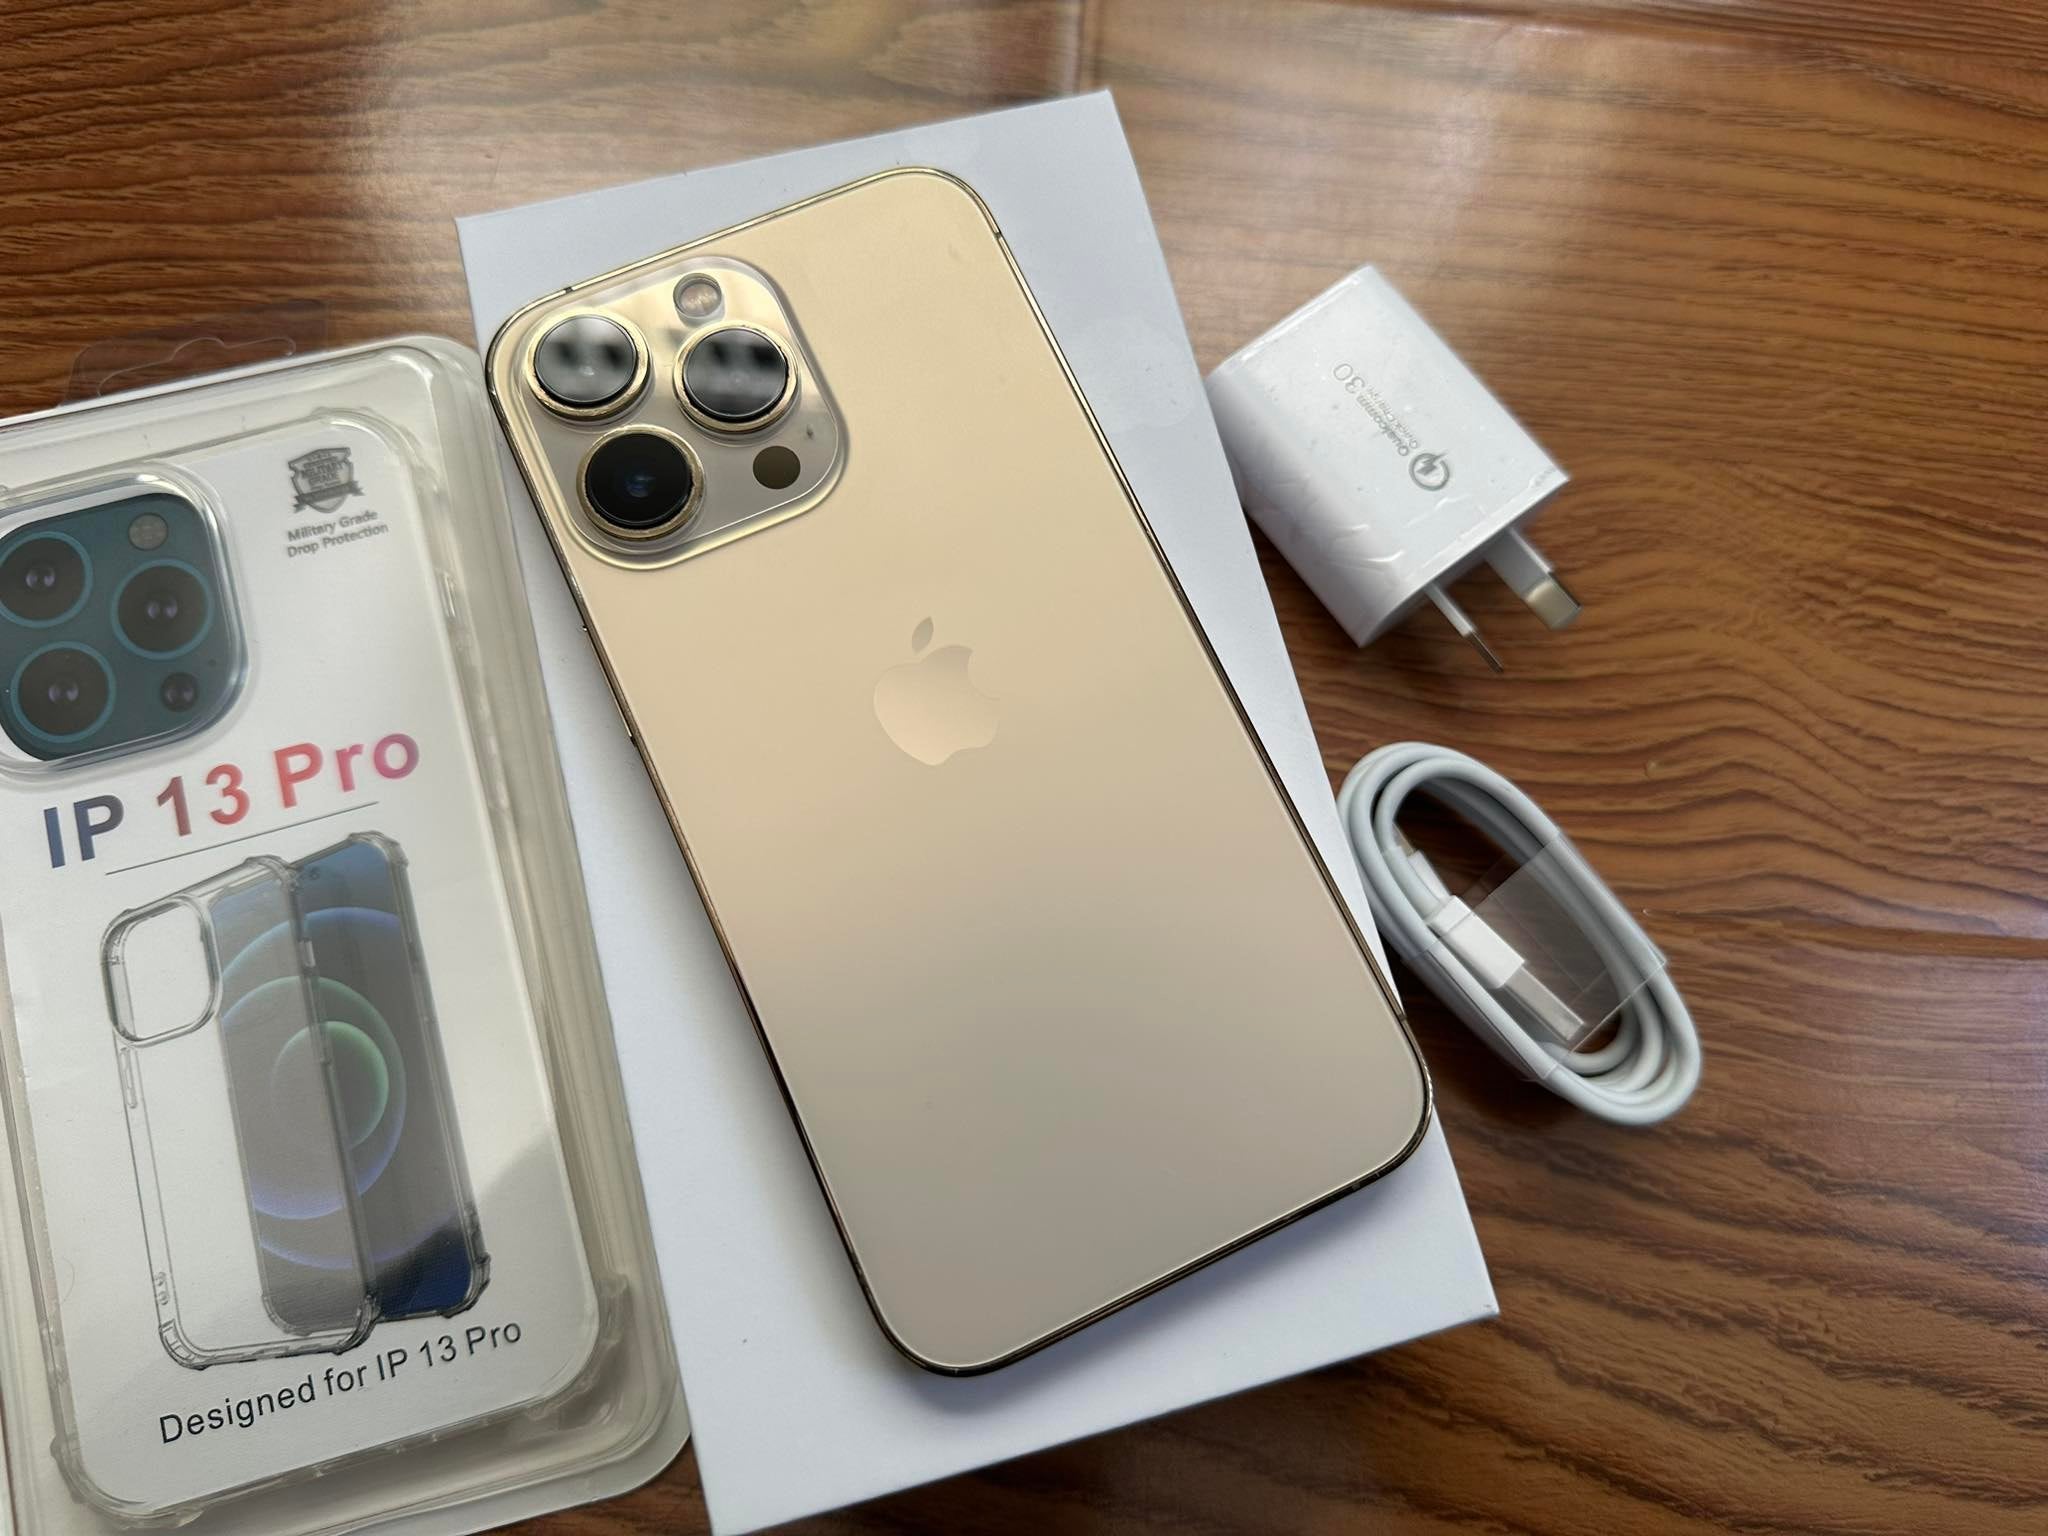 Apple iPhone 12 Pro 128GB 5G Gold (As New) New Display * Free Case, Screen Protector, Shipping*